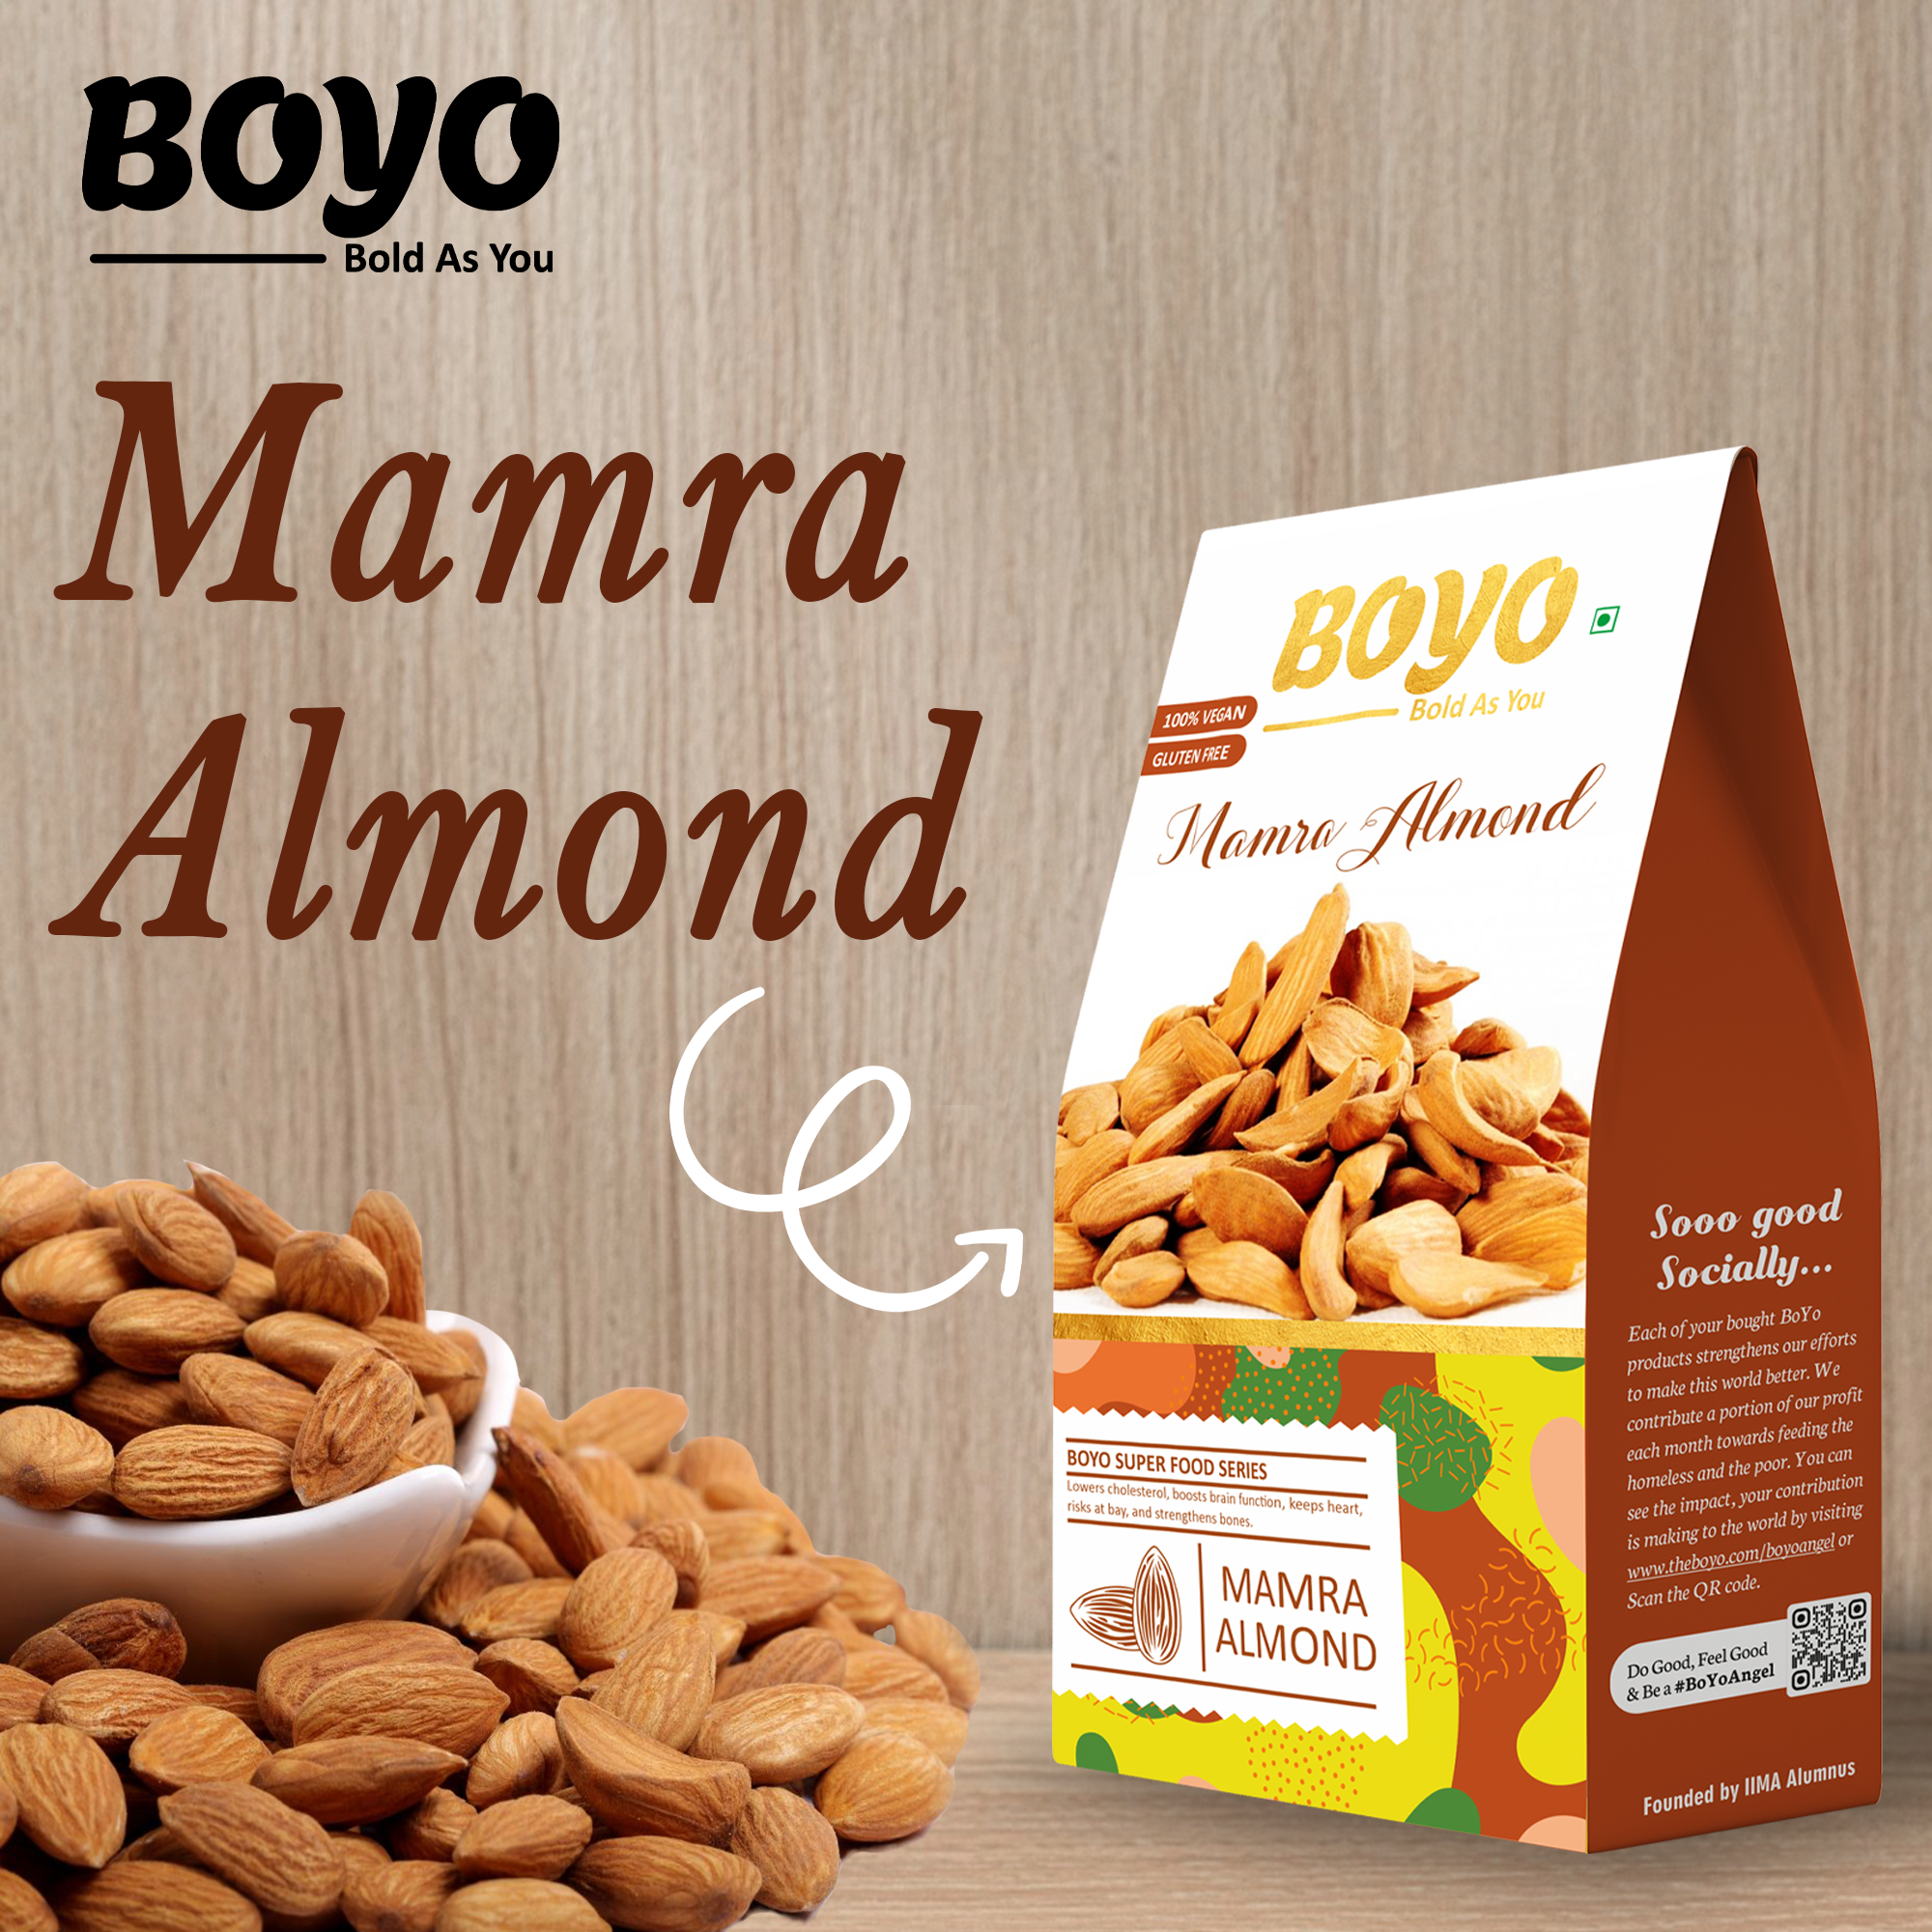 BOYO Almond 200g - Raw Mamra Almonds - Healthy Snacks and Dry Fruits - Gluten Free - High in Fiber and Immunity-Boosting Nutrients